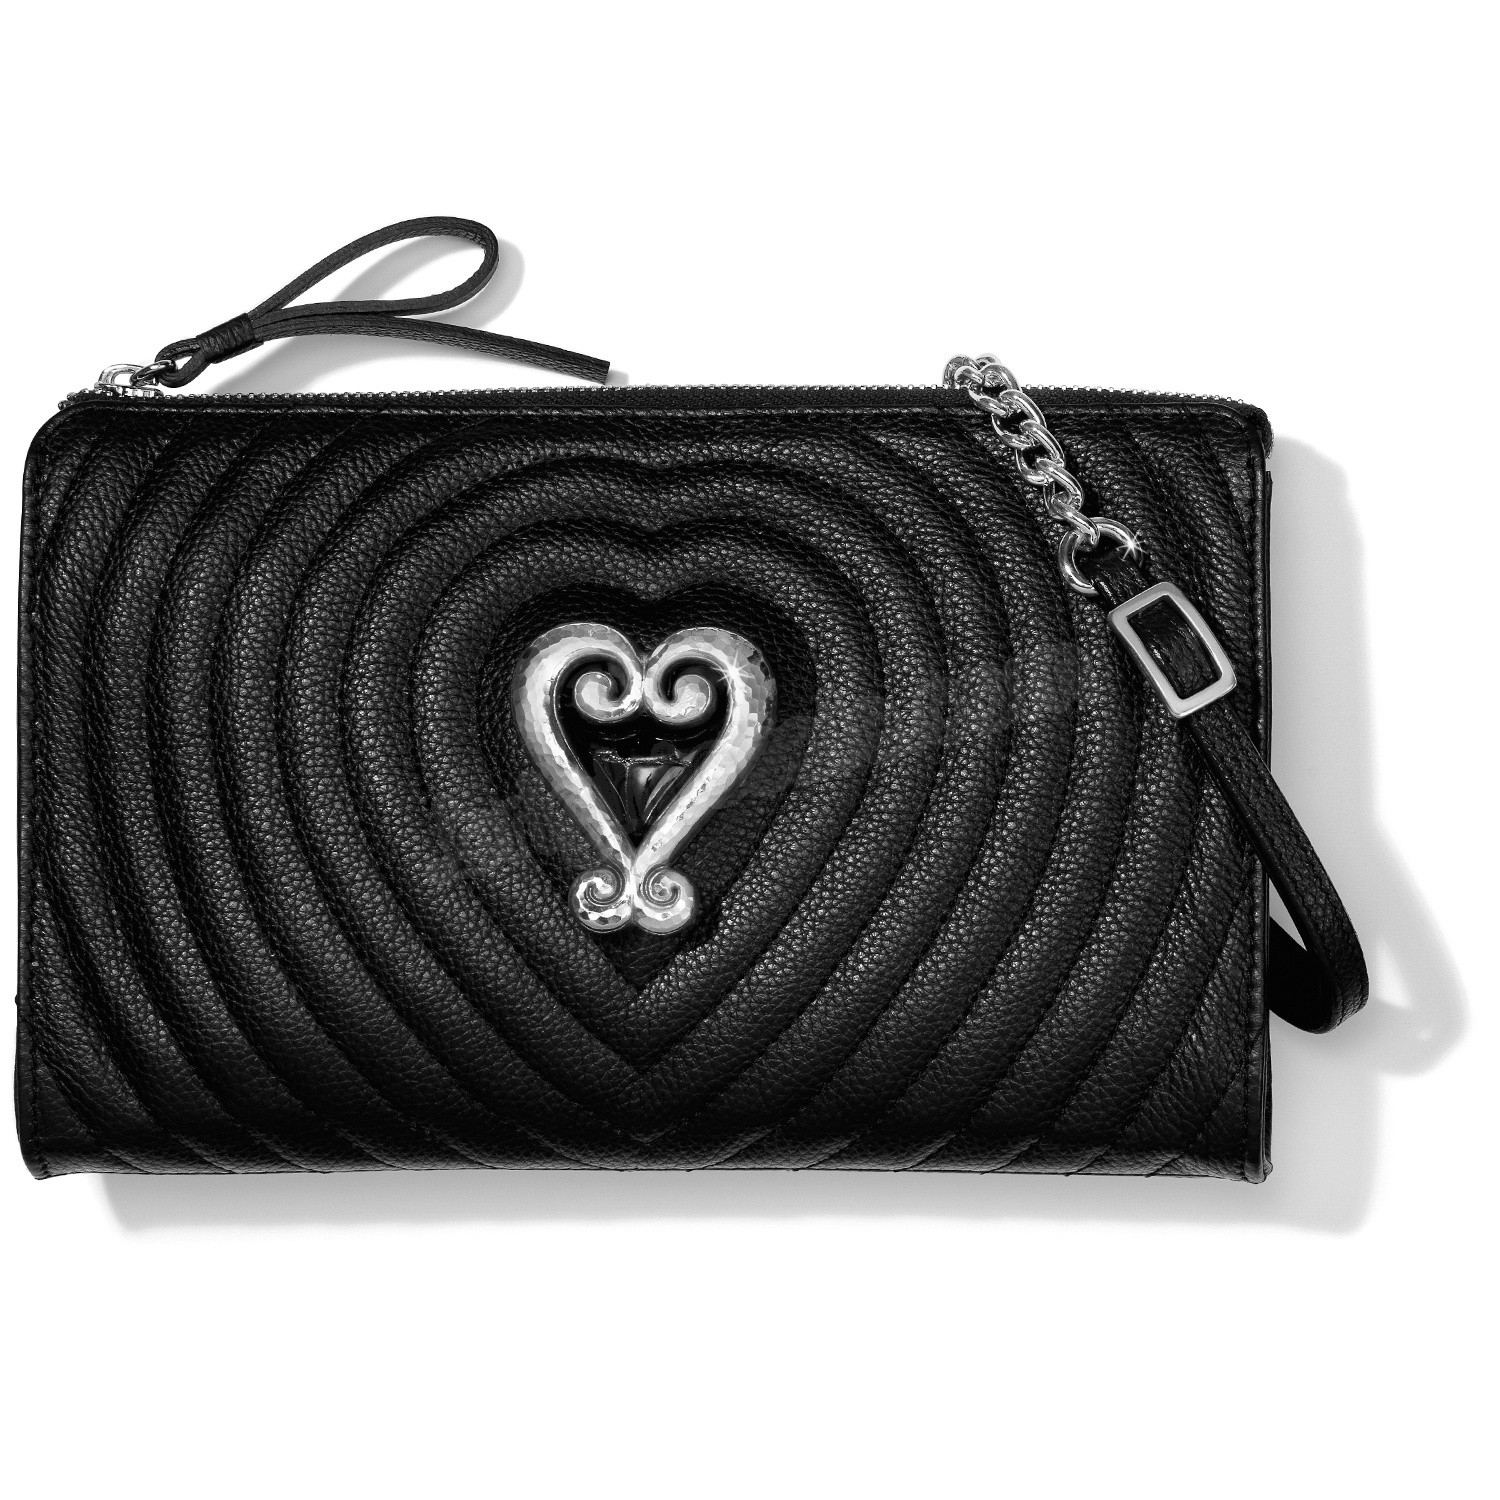 Brighton Collectibles & Online Discount Puffy Love Quilted Cross Body - Brighton Collectibles & Online Discount Puffy Love Quilted Cross Body